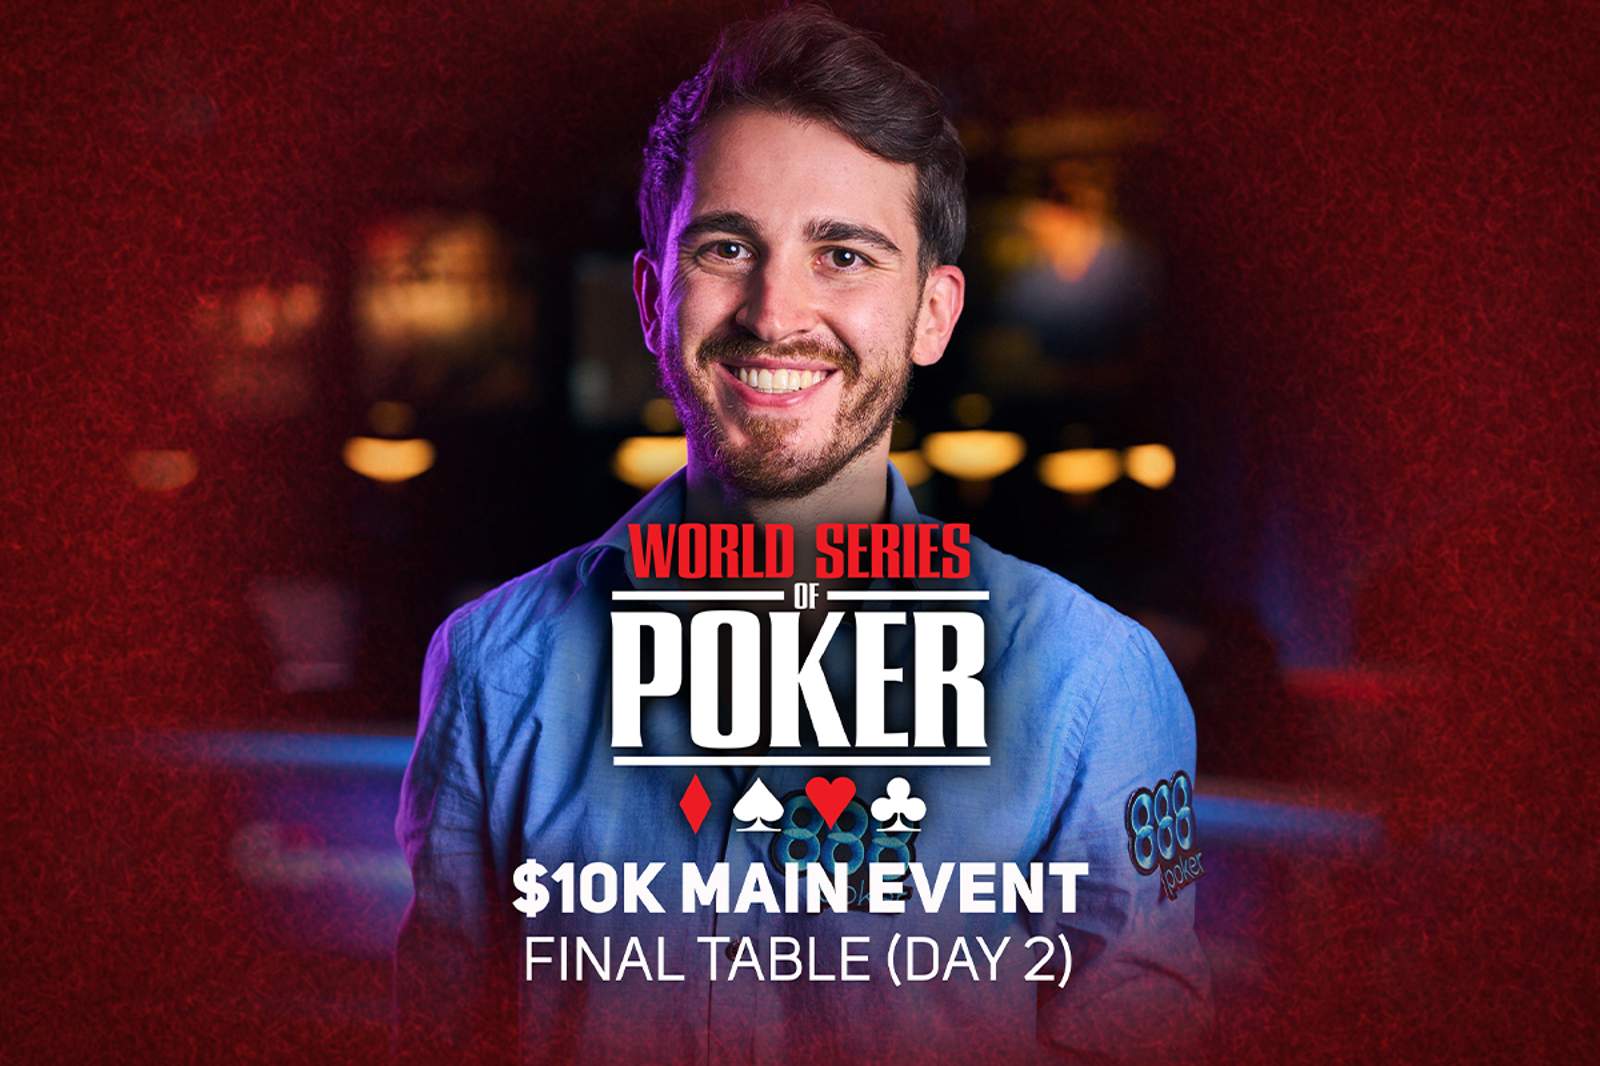 Watch the 2021 WSOP Main Event Final Table Conclude on PokerGO.com at 6 p.m. ET